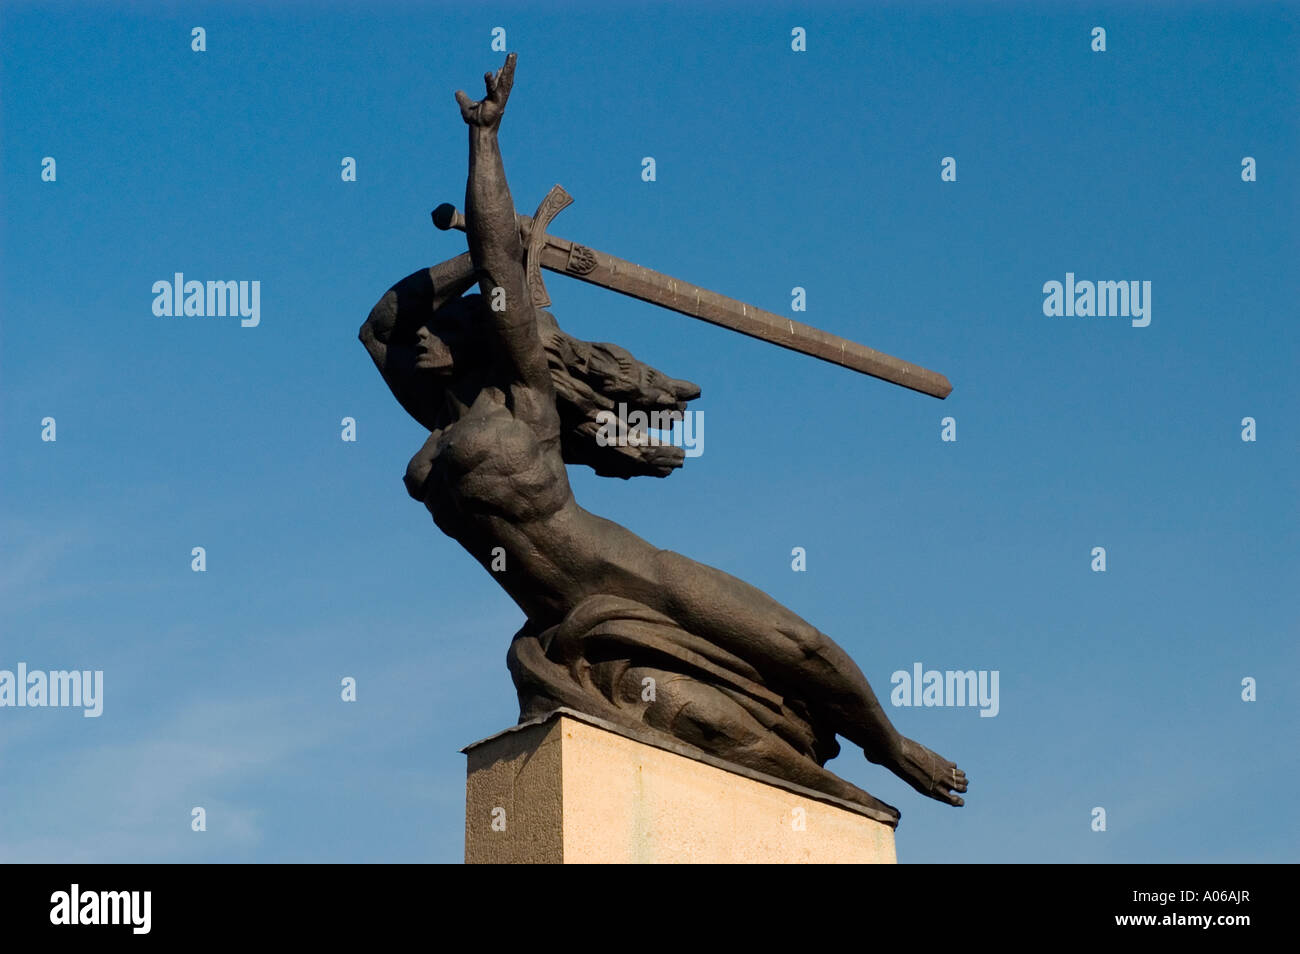 Nike with sword statue with blue sky background Warsaw Poland Stock Photo